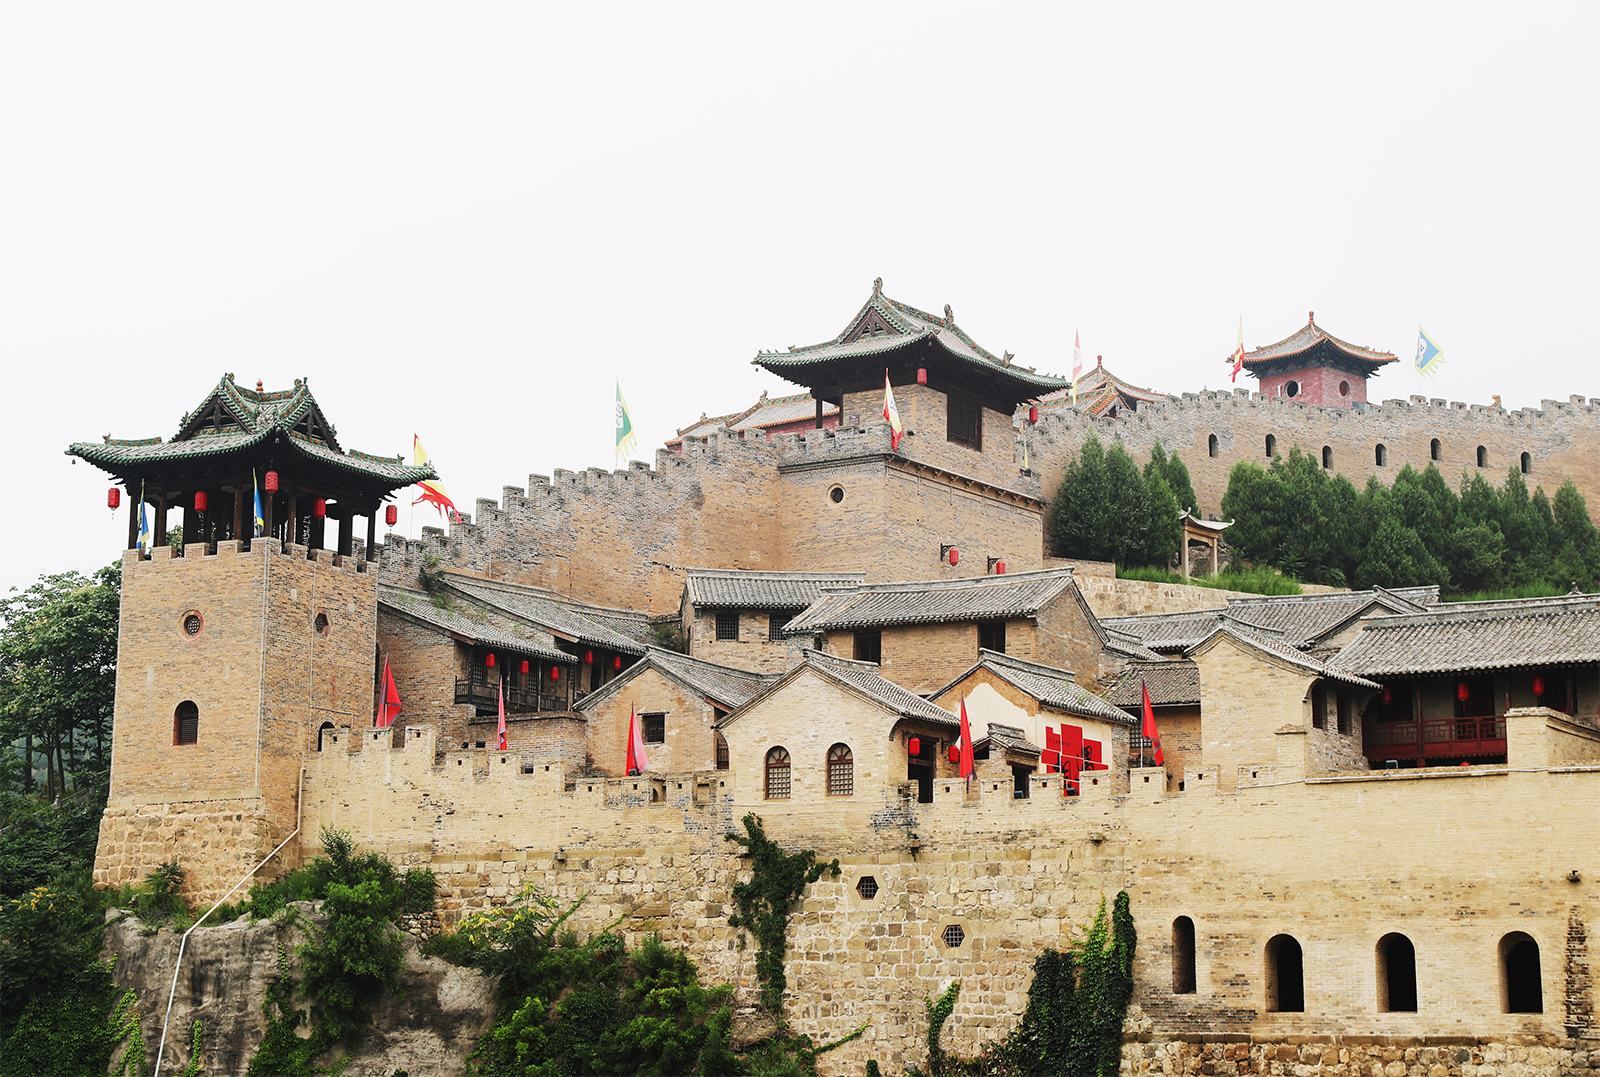 The architecture of Xiangyu Ancient Castle is orderly and harmonious. /CGTN